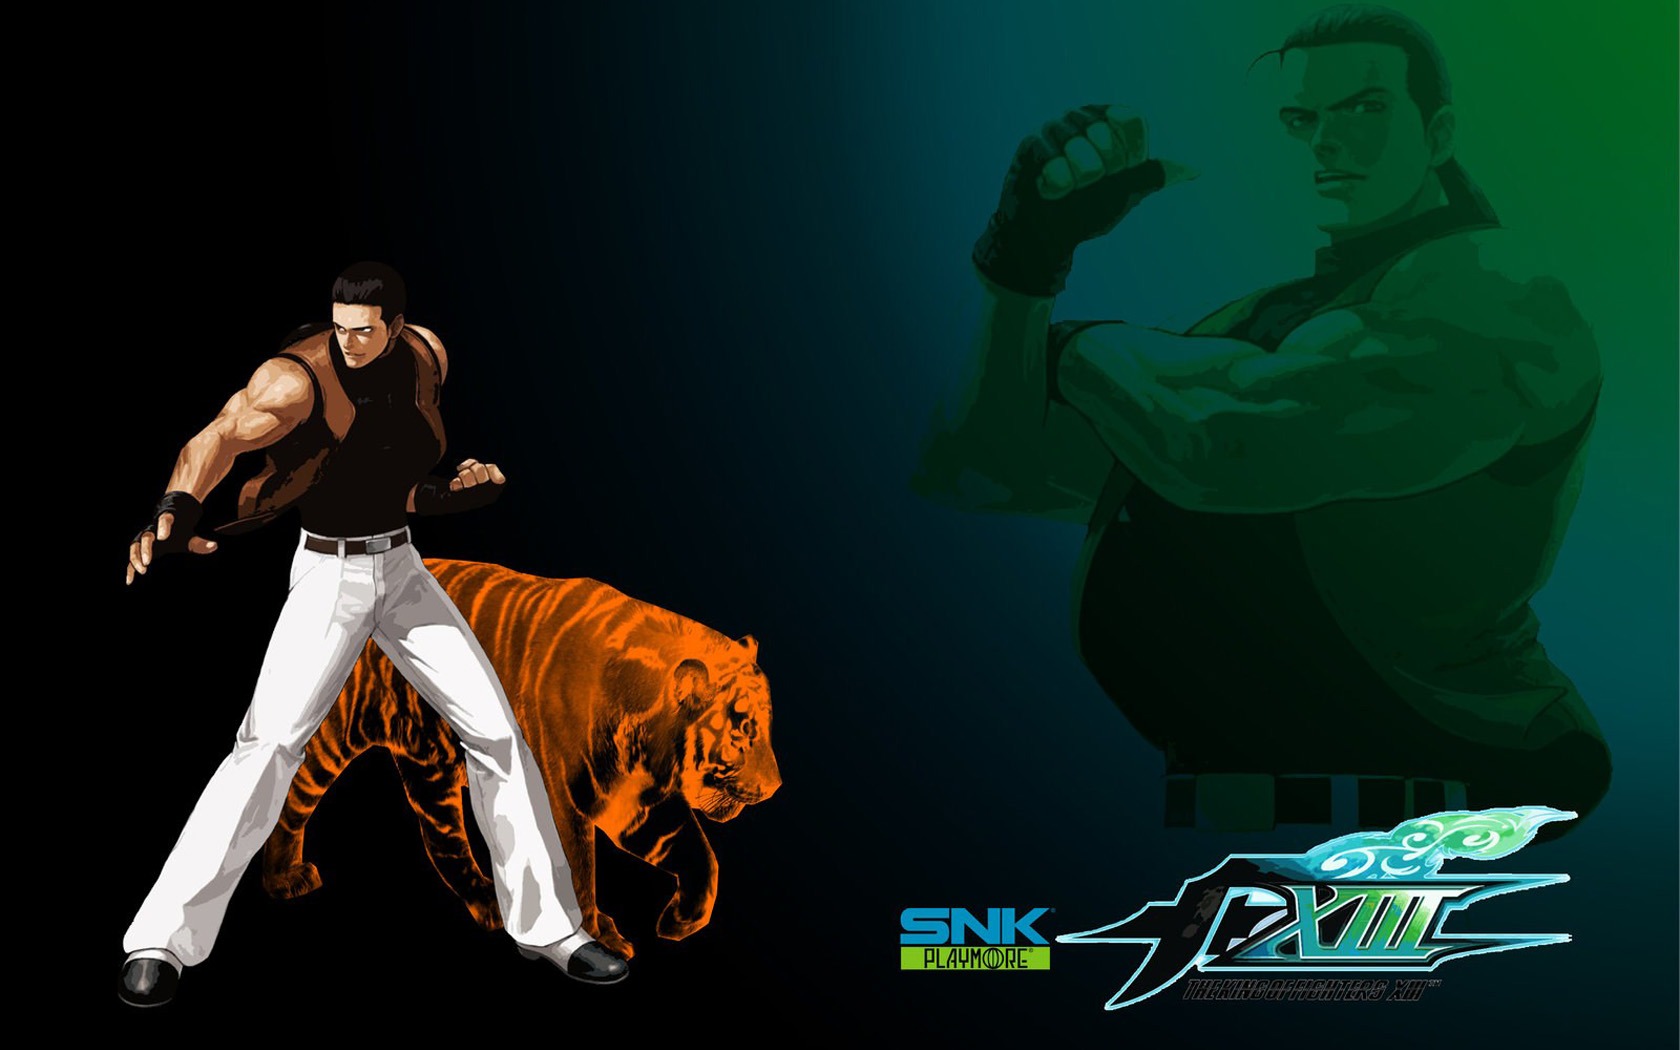 Le roi de wallpapers Fighters XIII #17 - 1680x1050